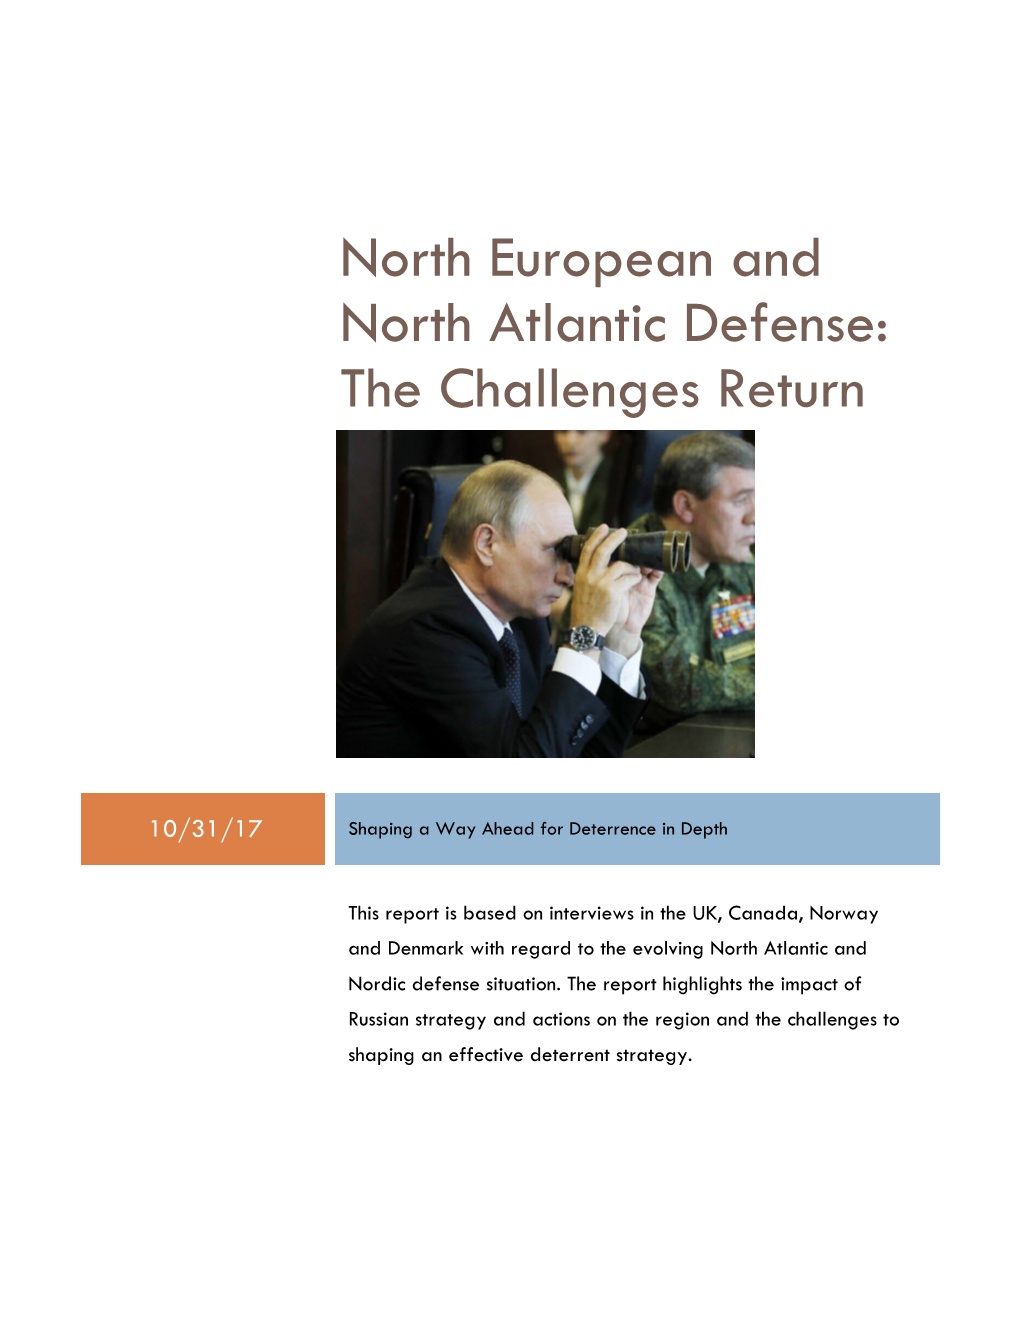 North Atlantic and Nordic Defense Situation